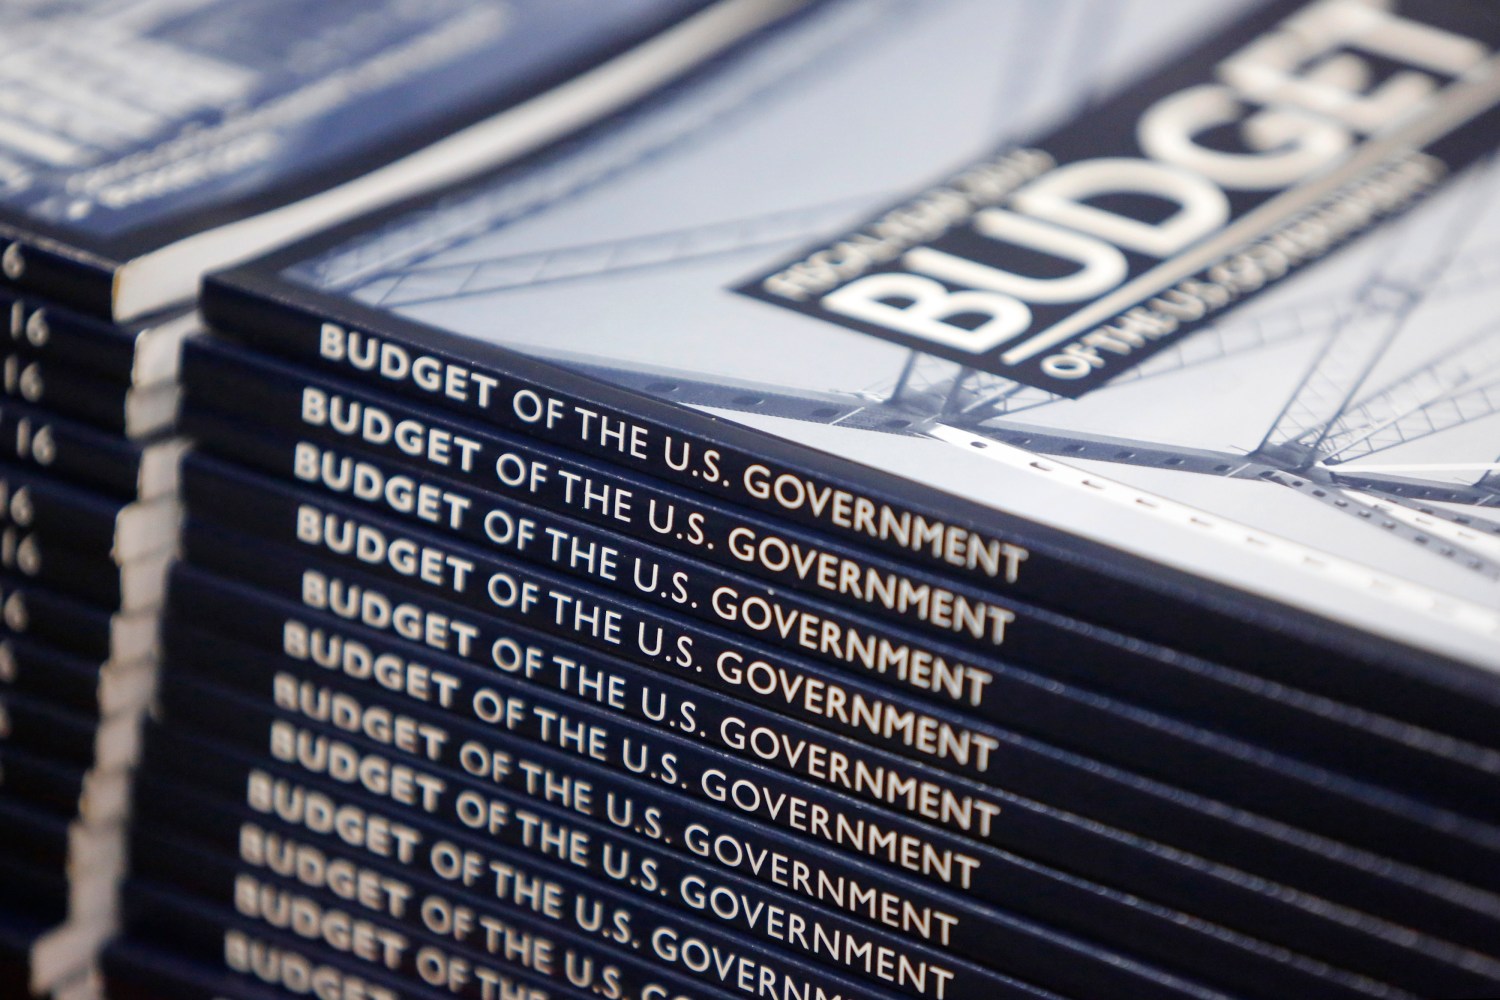 Copies of the 2016 U.S. Government budget